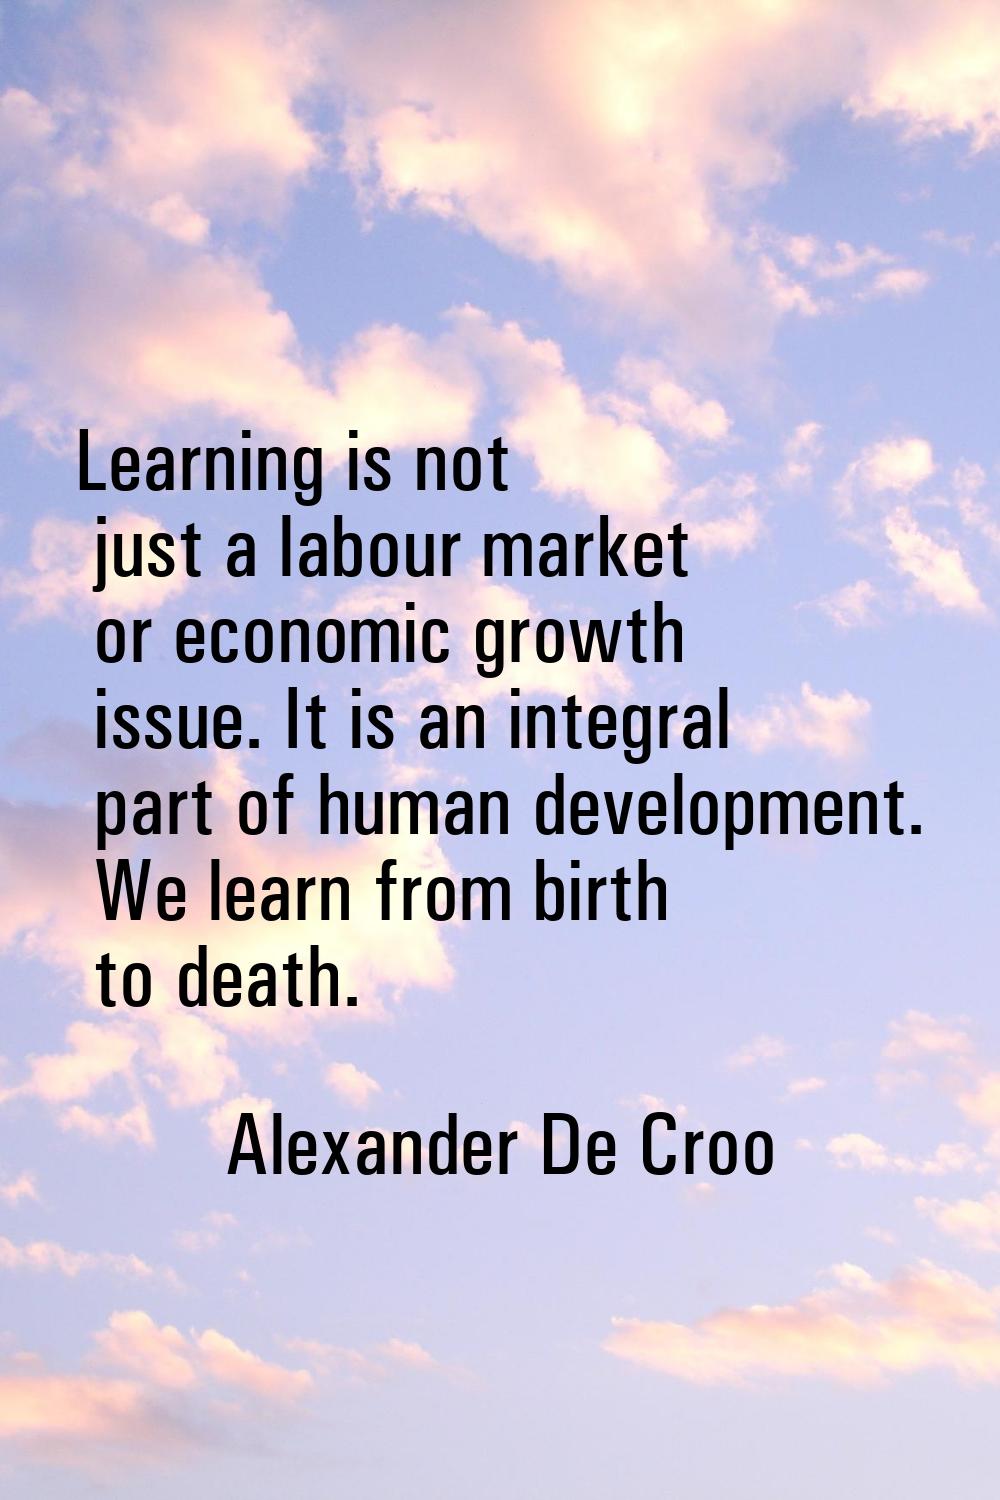 Learning is not just a labour market or economic growth issue. It is an integral part of human deve